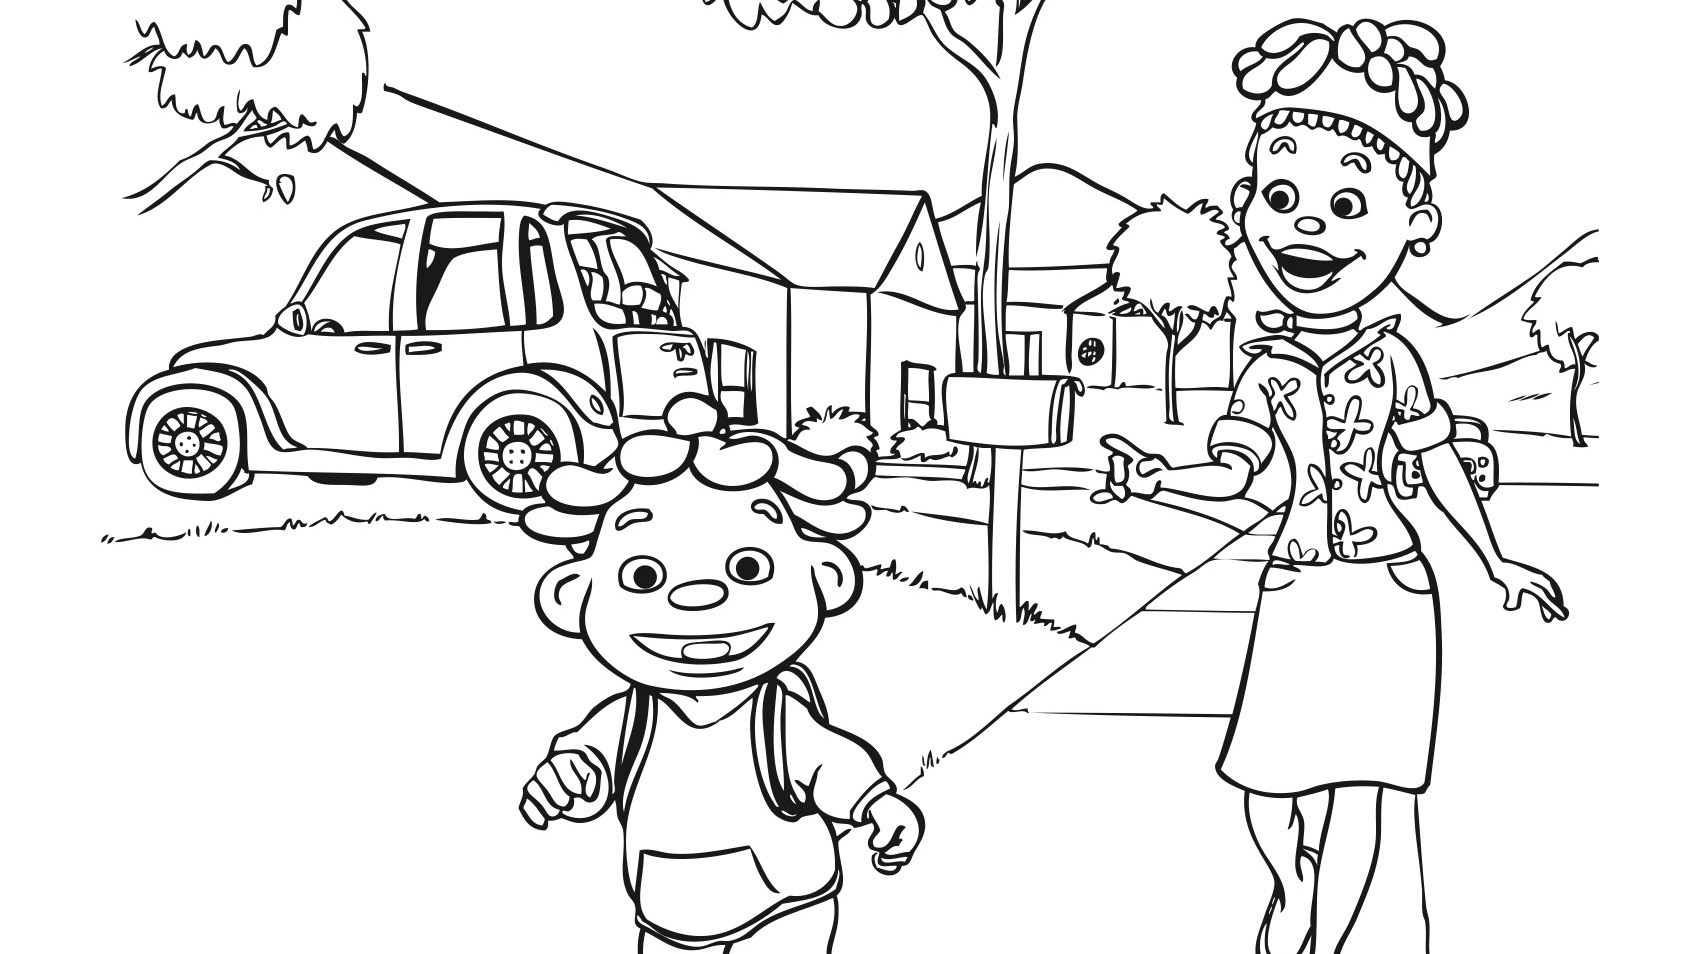 Take a Walk Coloring Page | Kids Coloring Pages | PBS KIDS for Parents